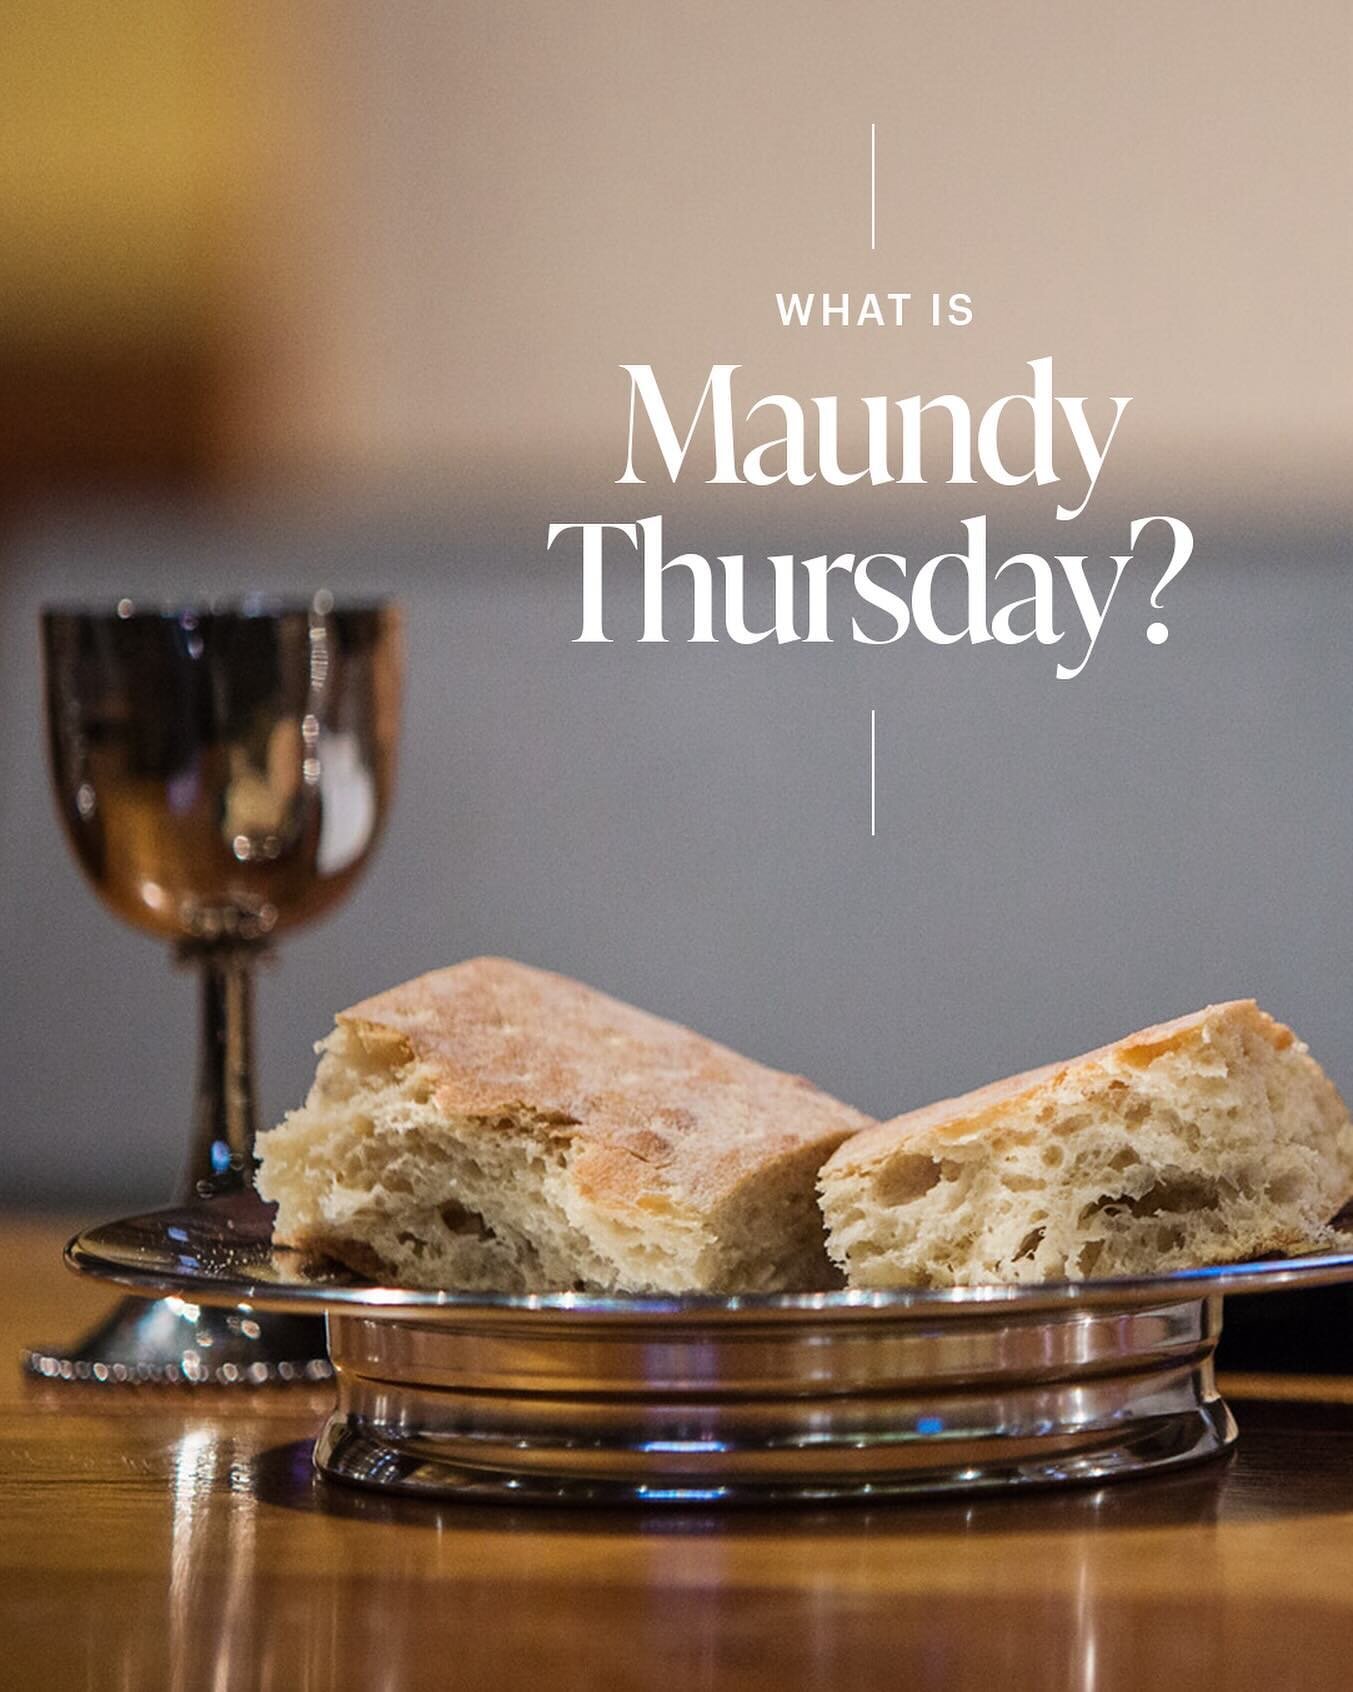 What is Maundy Thursday?

Today at 6:30pm we&rsquo;re having a special service we call &ldquo;Maundy Thursday&rdquo;.

Maundy Thursday is a service in which we remember the Last Supper of Jesus Christ with His disciples.

The word, &quot;maundy&quot;